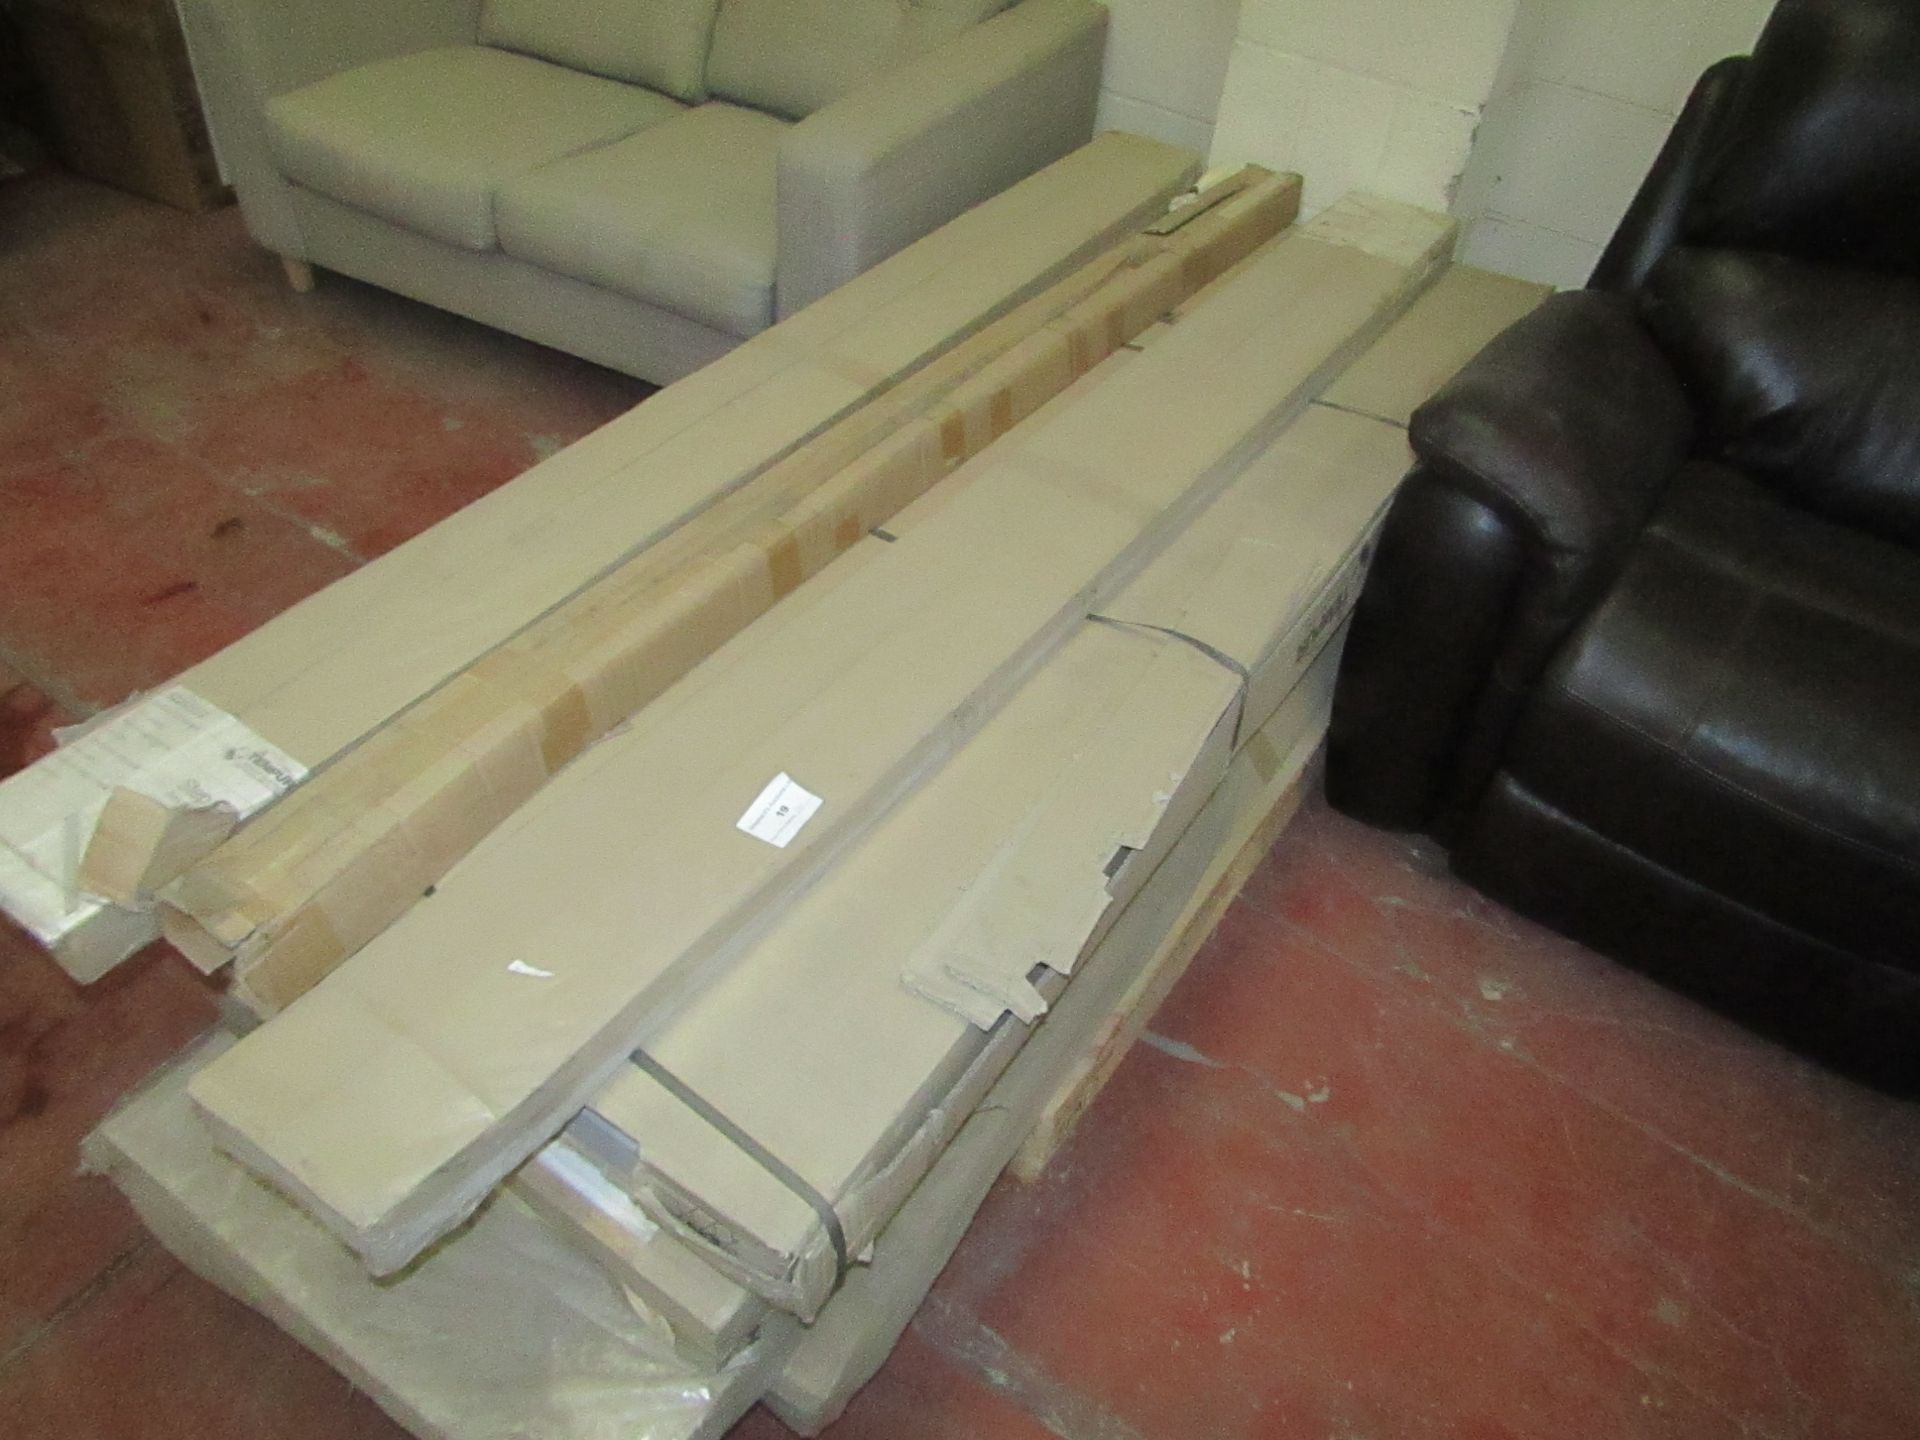 Tempur Day bed frame, comes in 8 boxes, unchecked but most still seems to be factory sealed